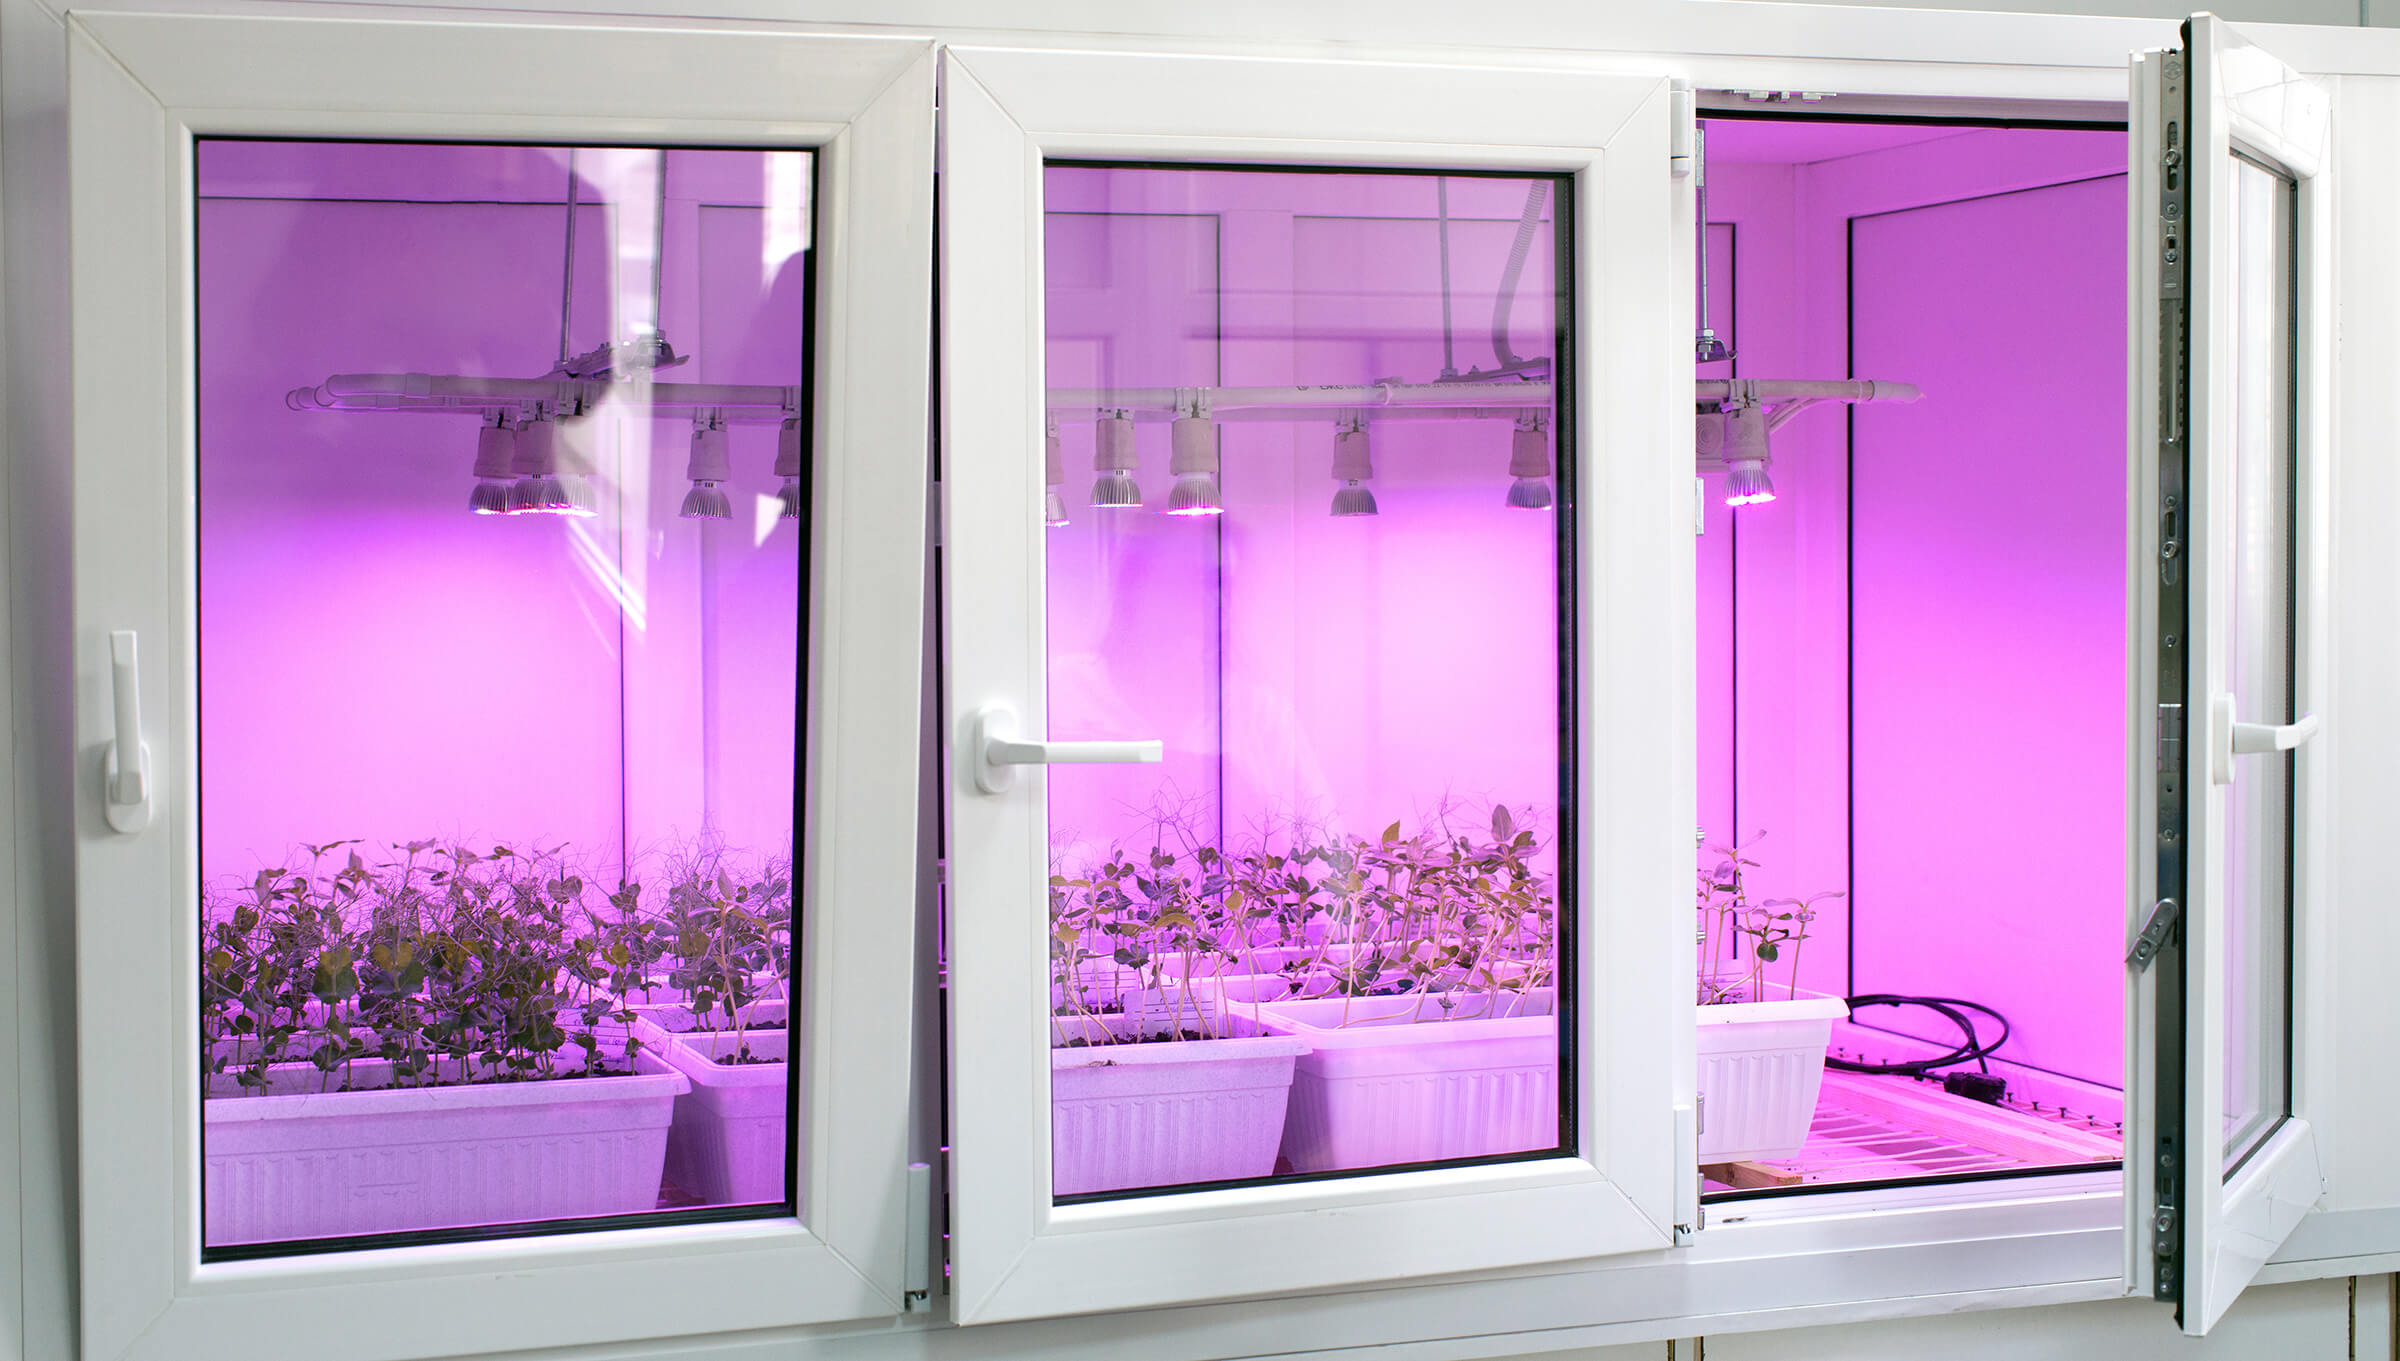 UV, Violet, and Far Red grow lights | image